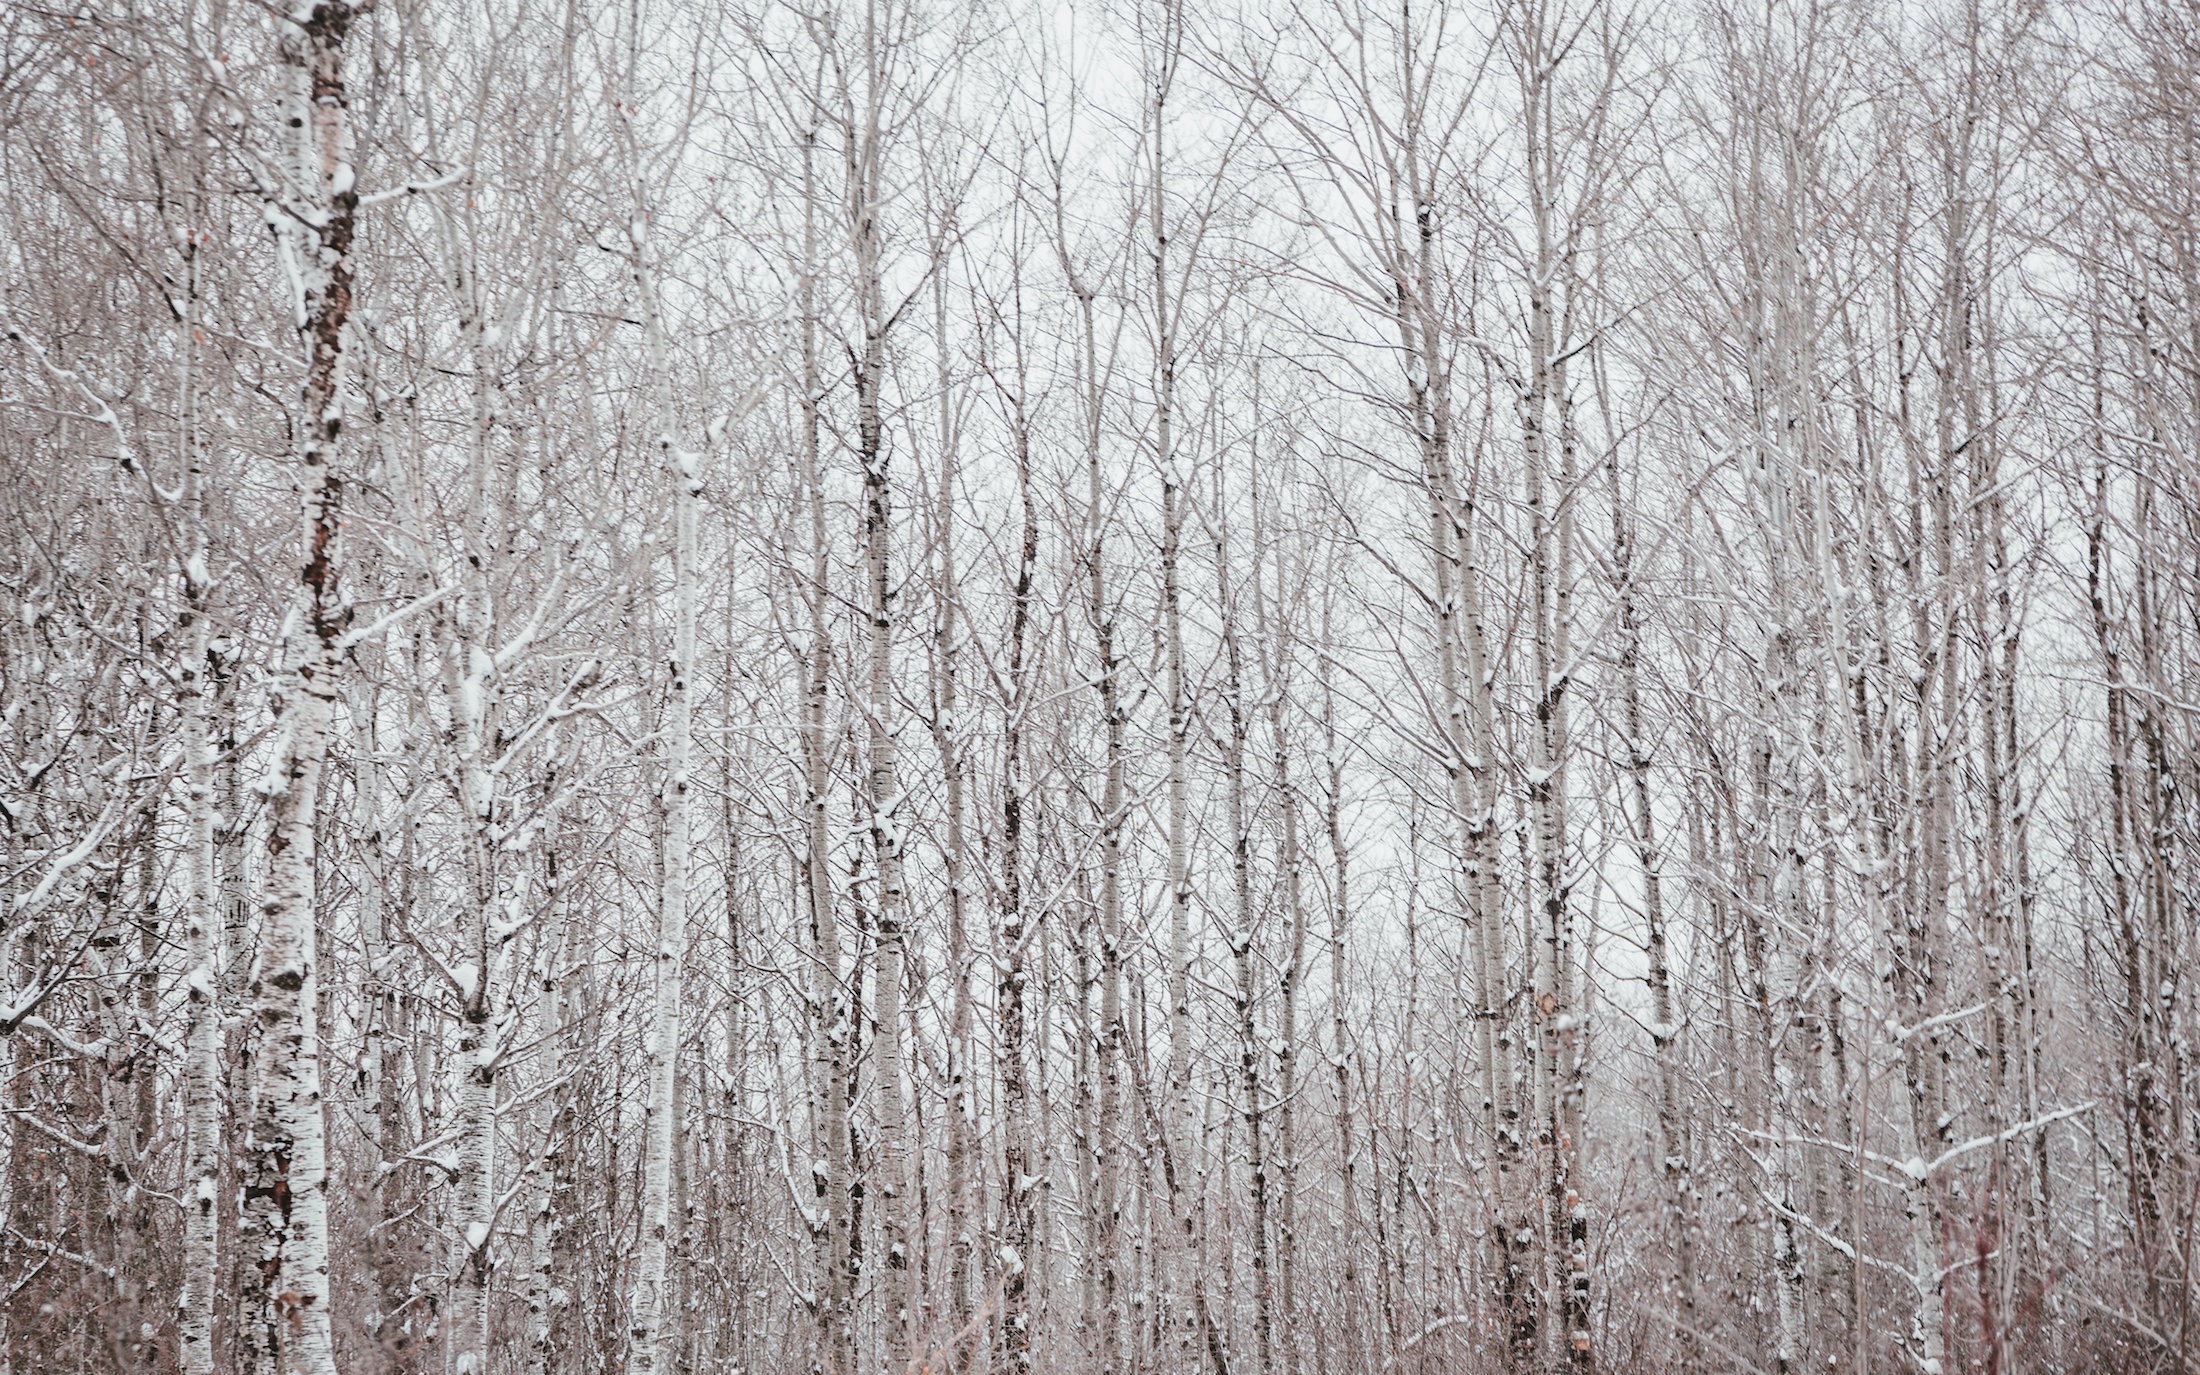 a-black-and-white-polar-forest-against-a-white-winter-sky.jpg